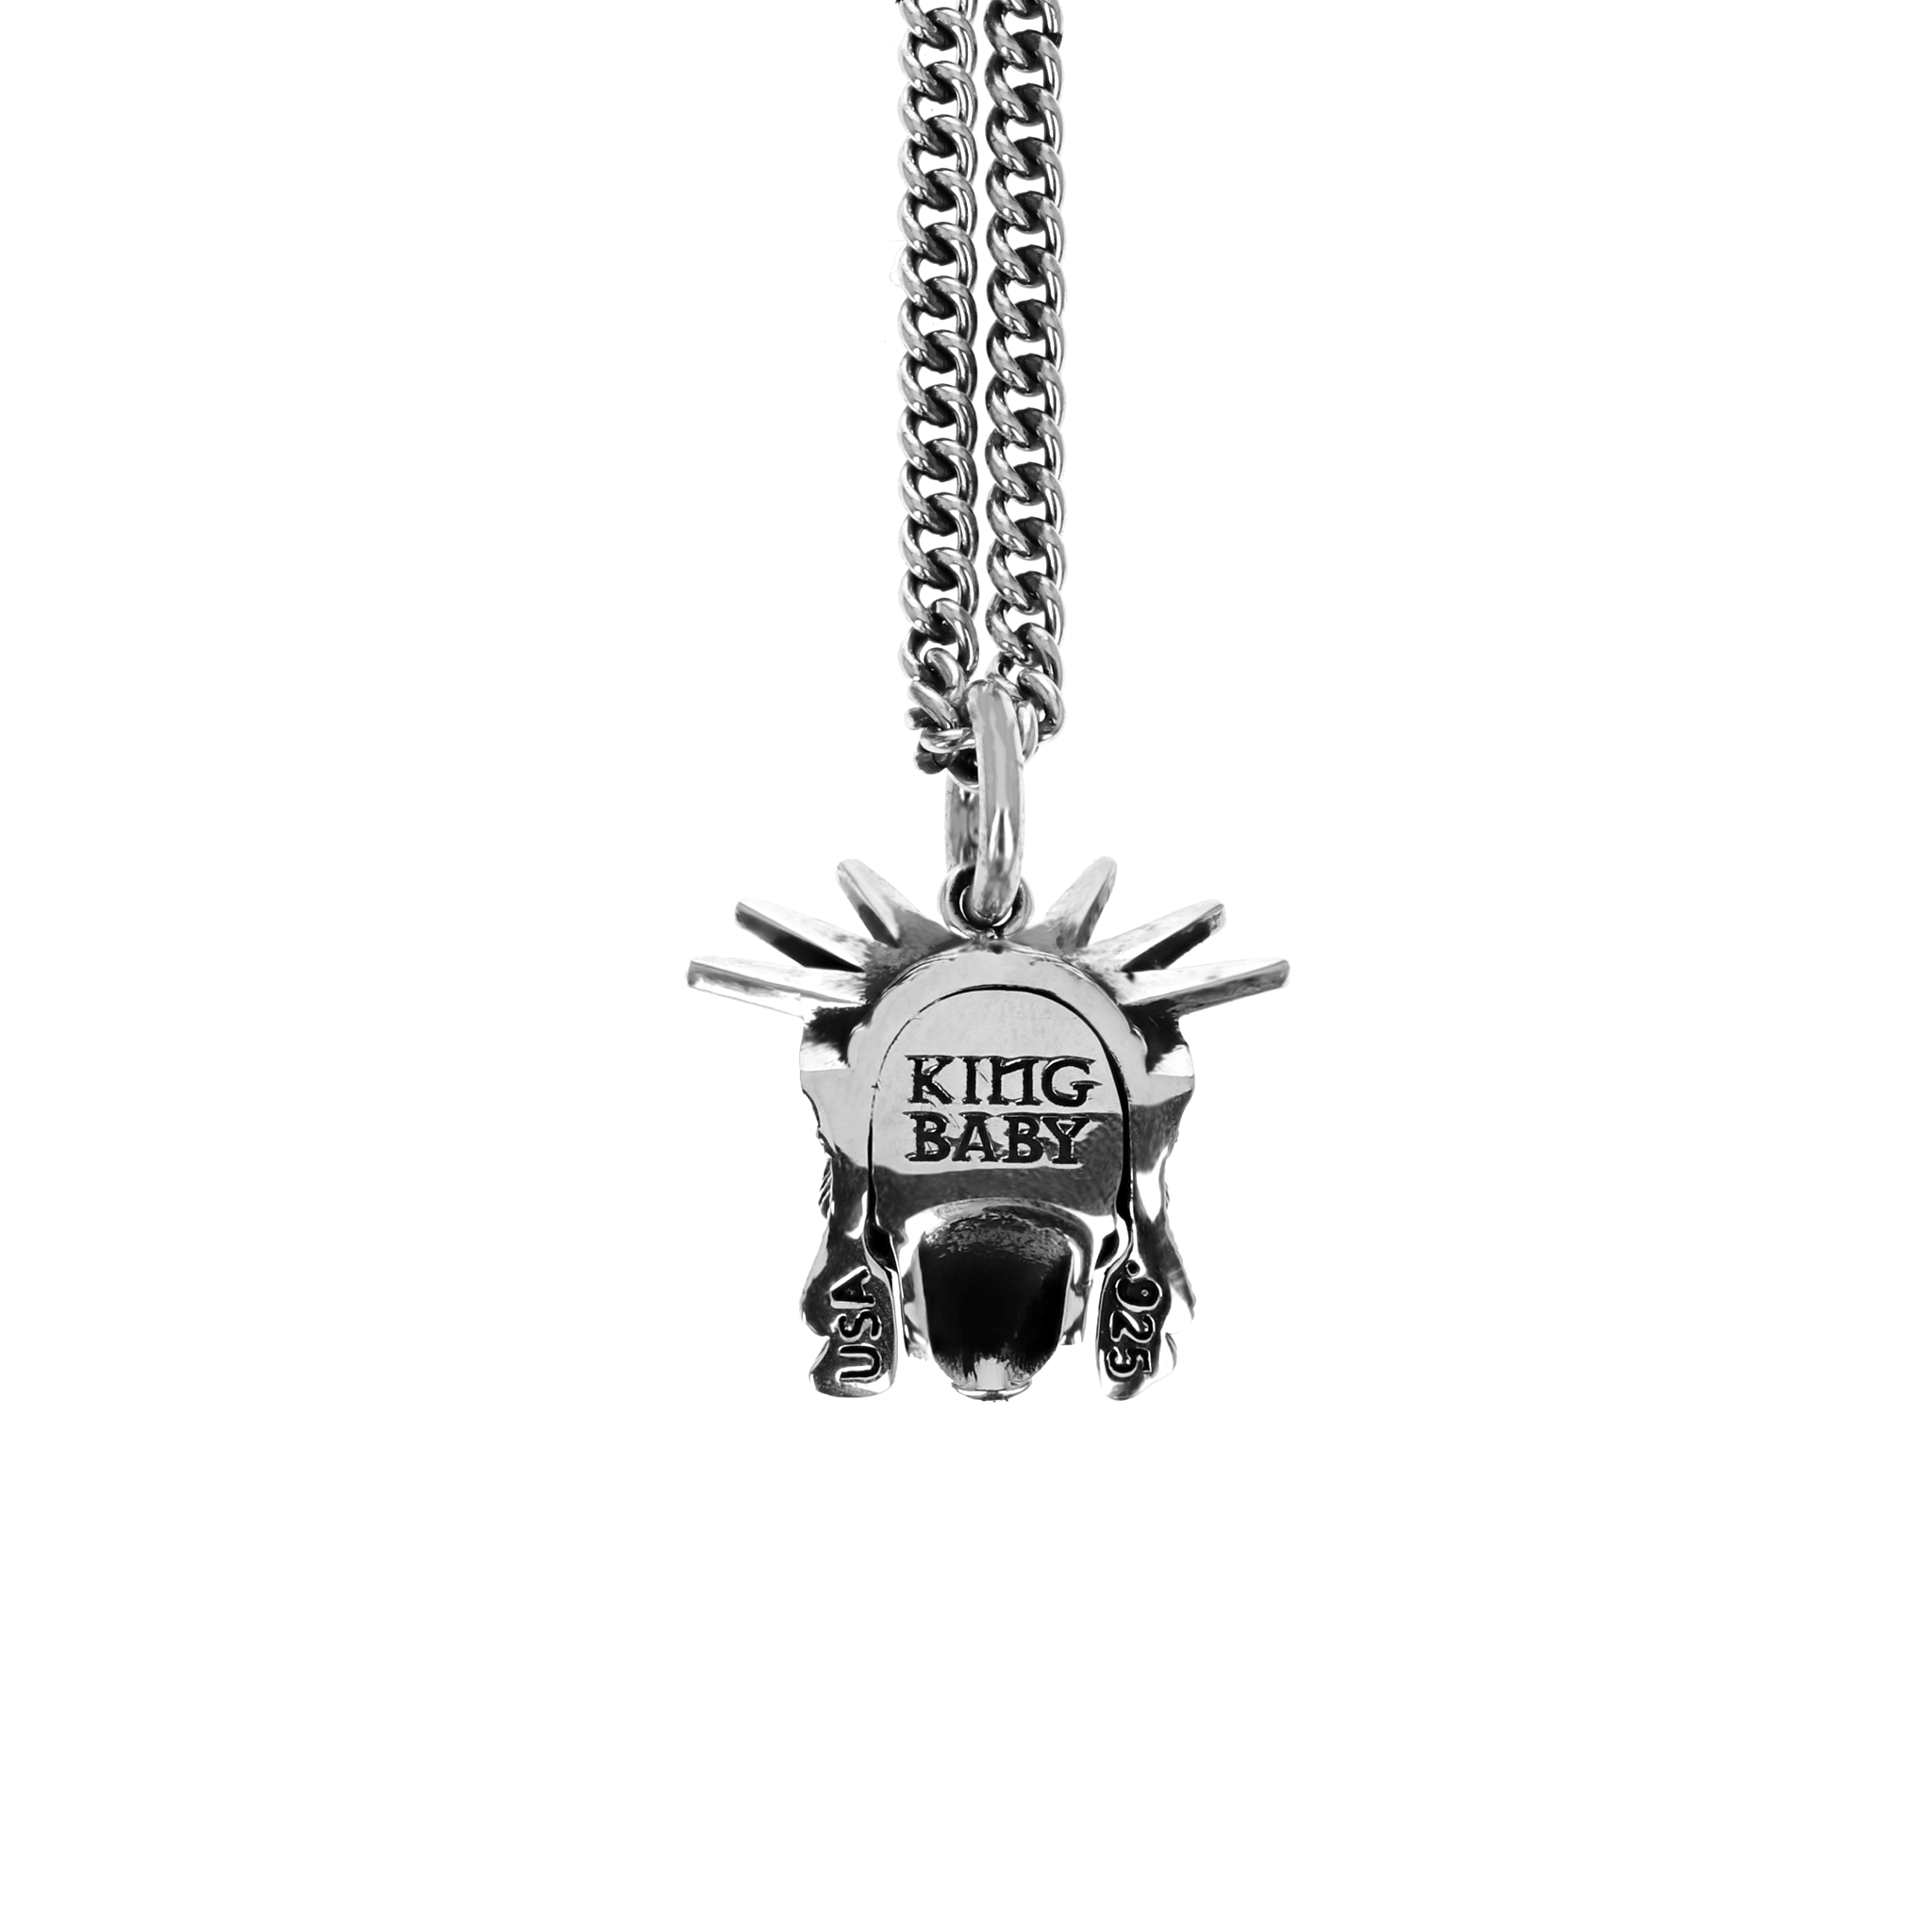 Product shot of back of skull pendant with statue of liberty crown on head